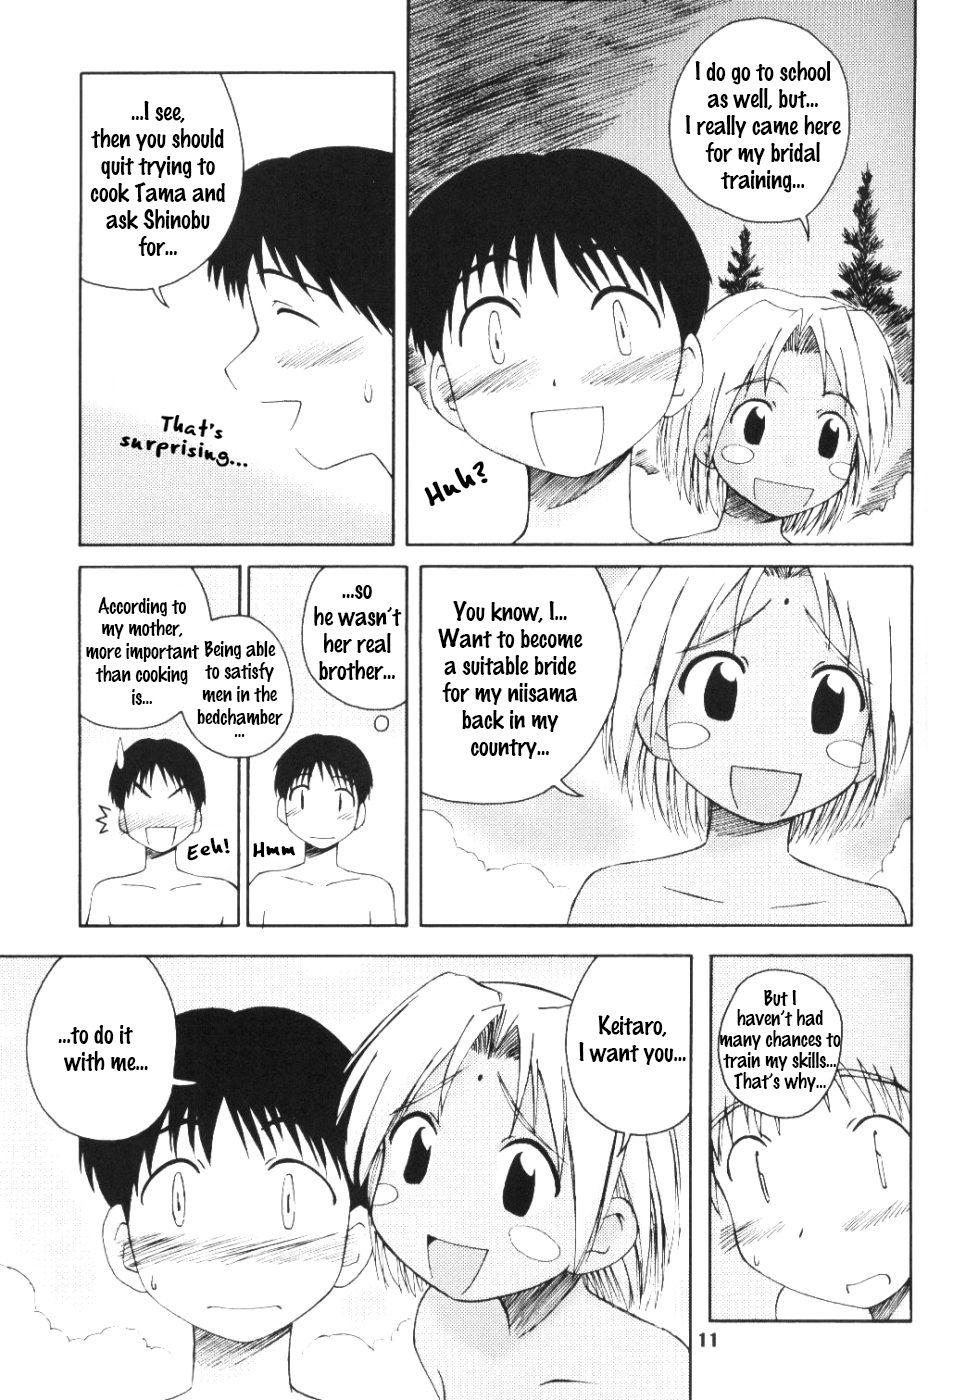 Glamour LH#1 - Love hina Passionate - Page 10